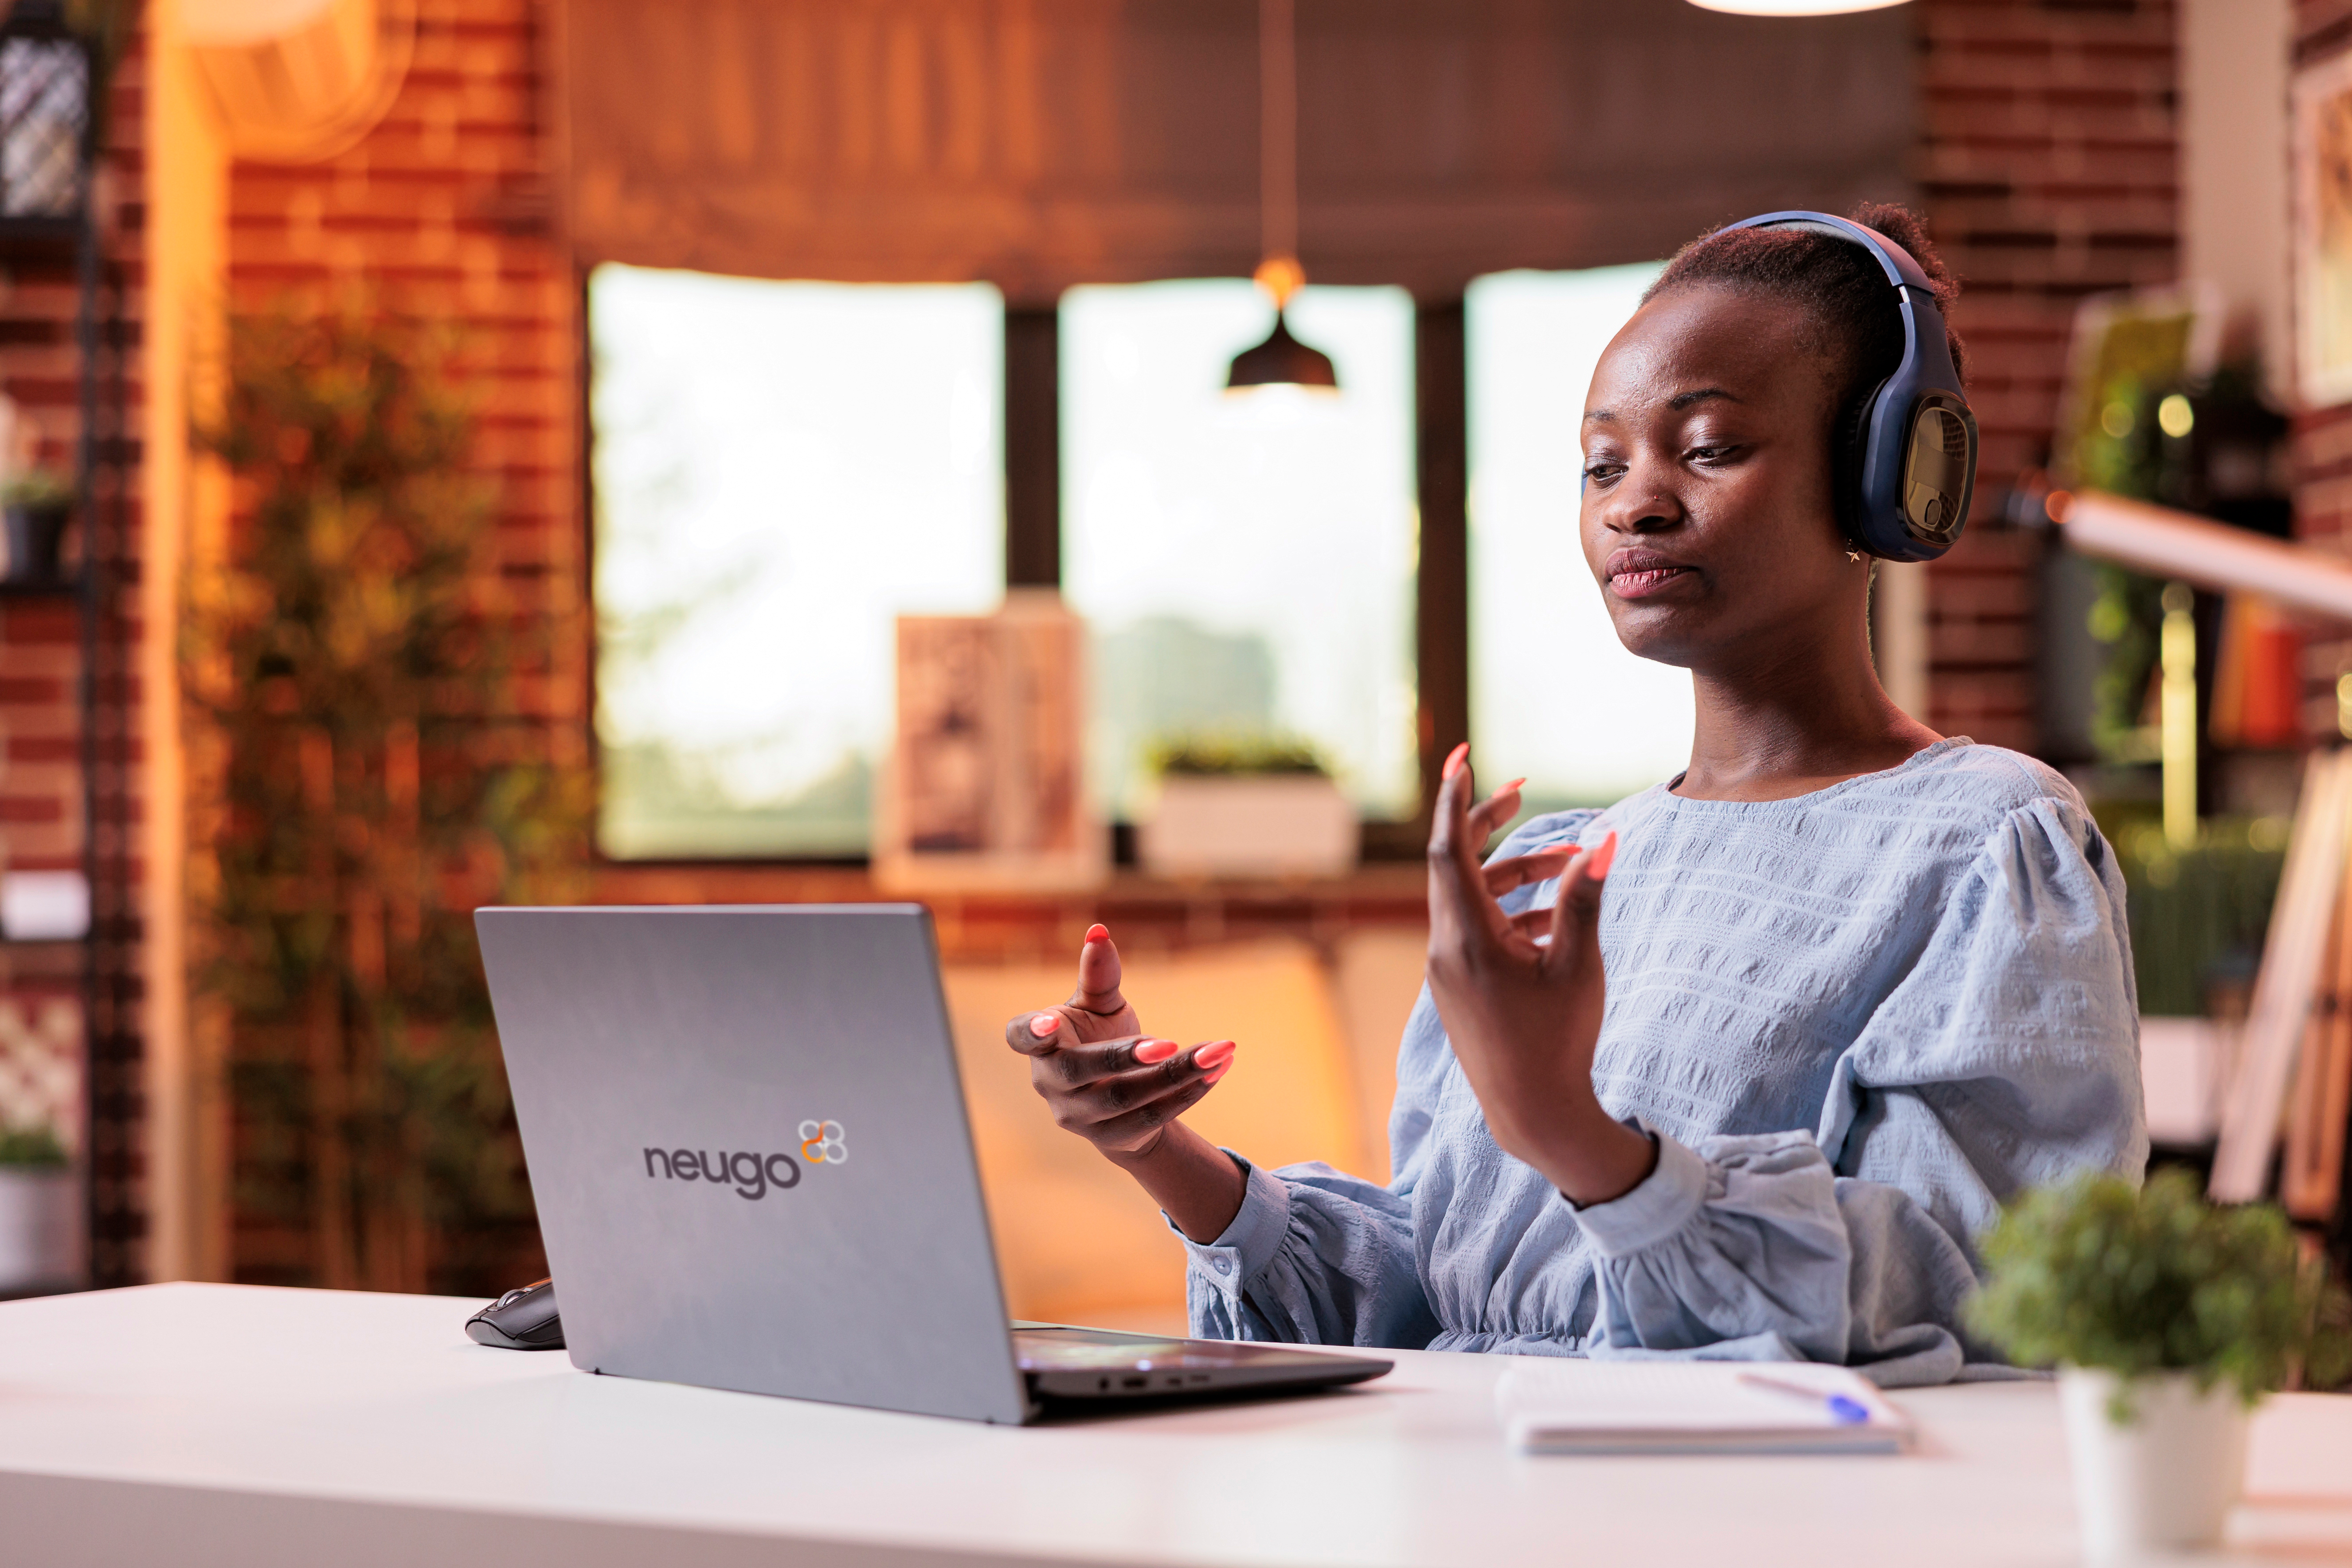 Next level remote working with Neugo, evolve your online collaboration tools